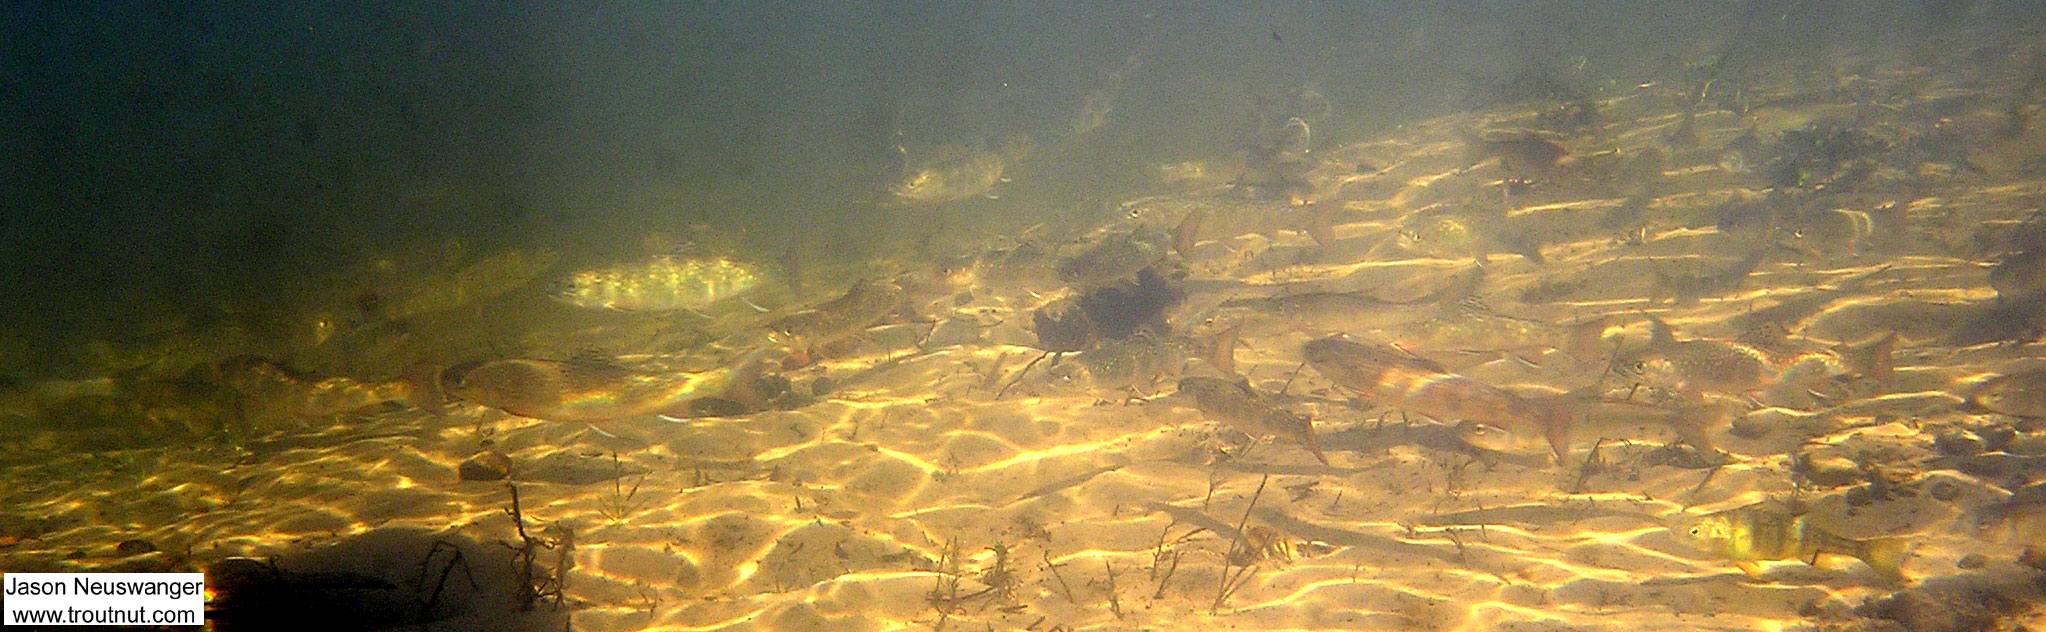 There are lots of brook trout here mixed in with a yellow perch at the bottom. From the Mystery Creek # 19 in Wisconsin.